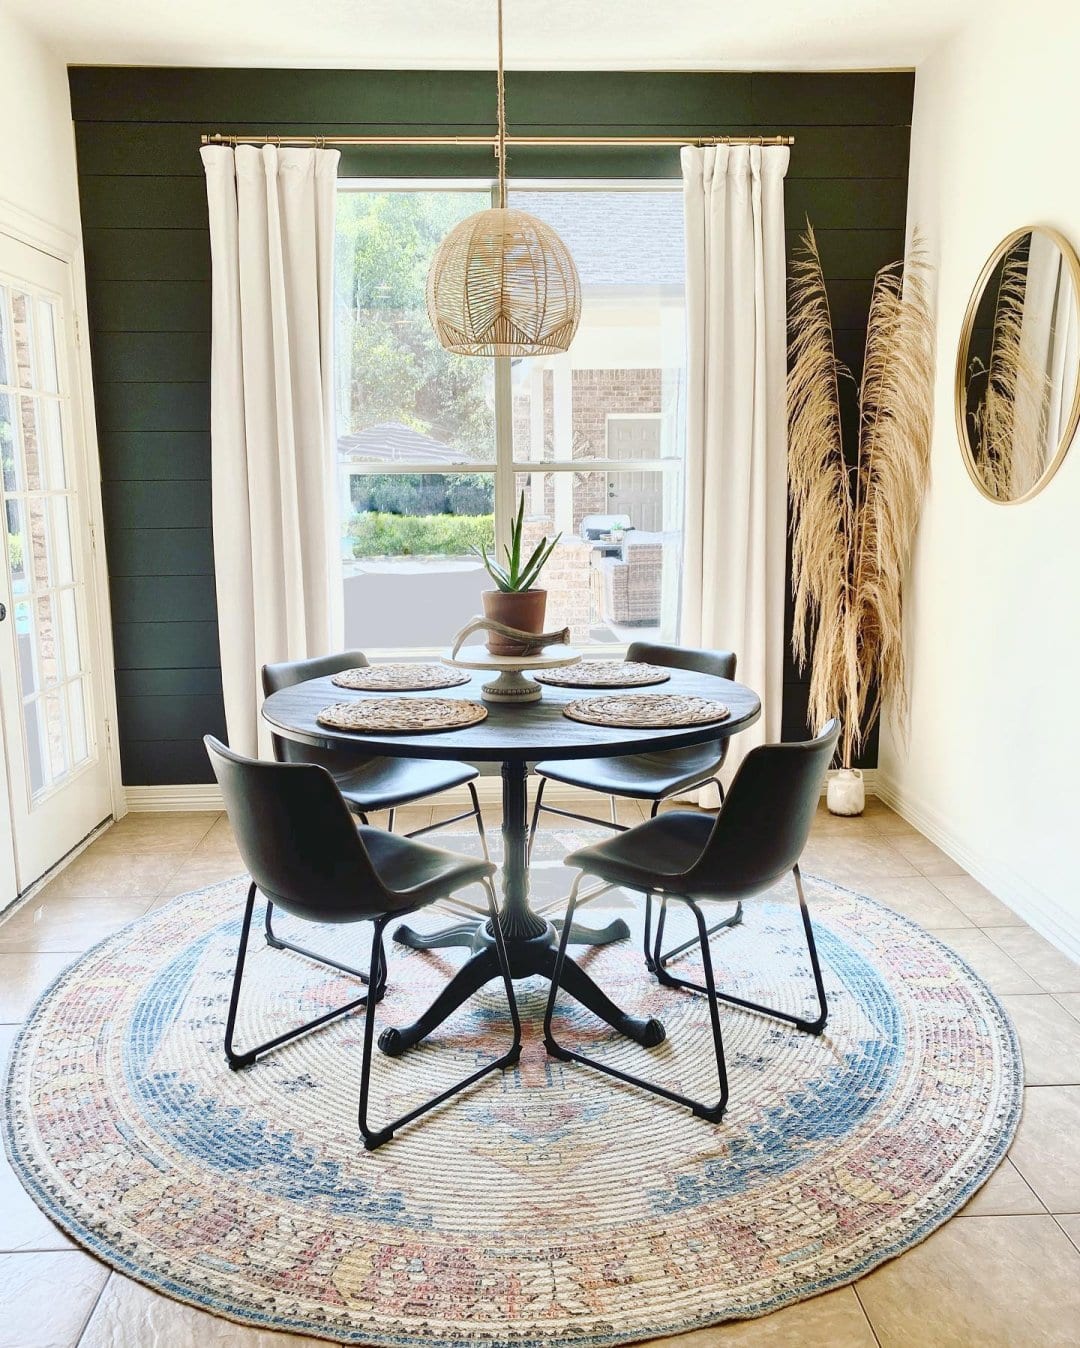 How To Decorate a Round Dining Table - 10 Ideas